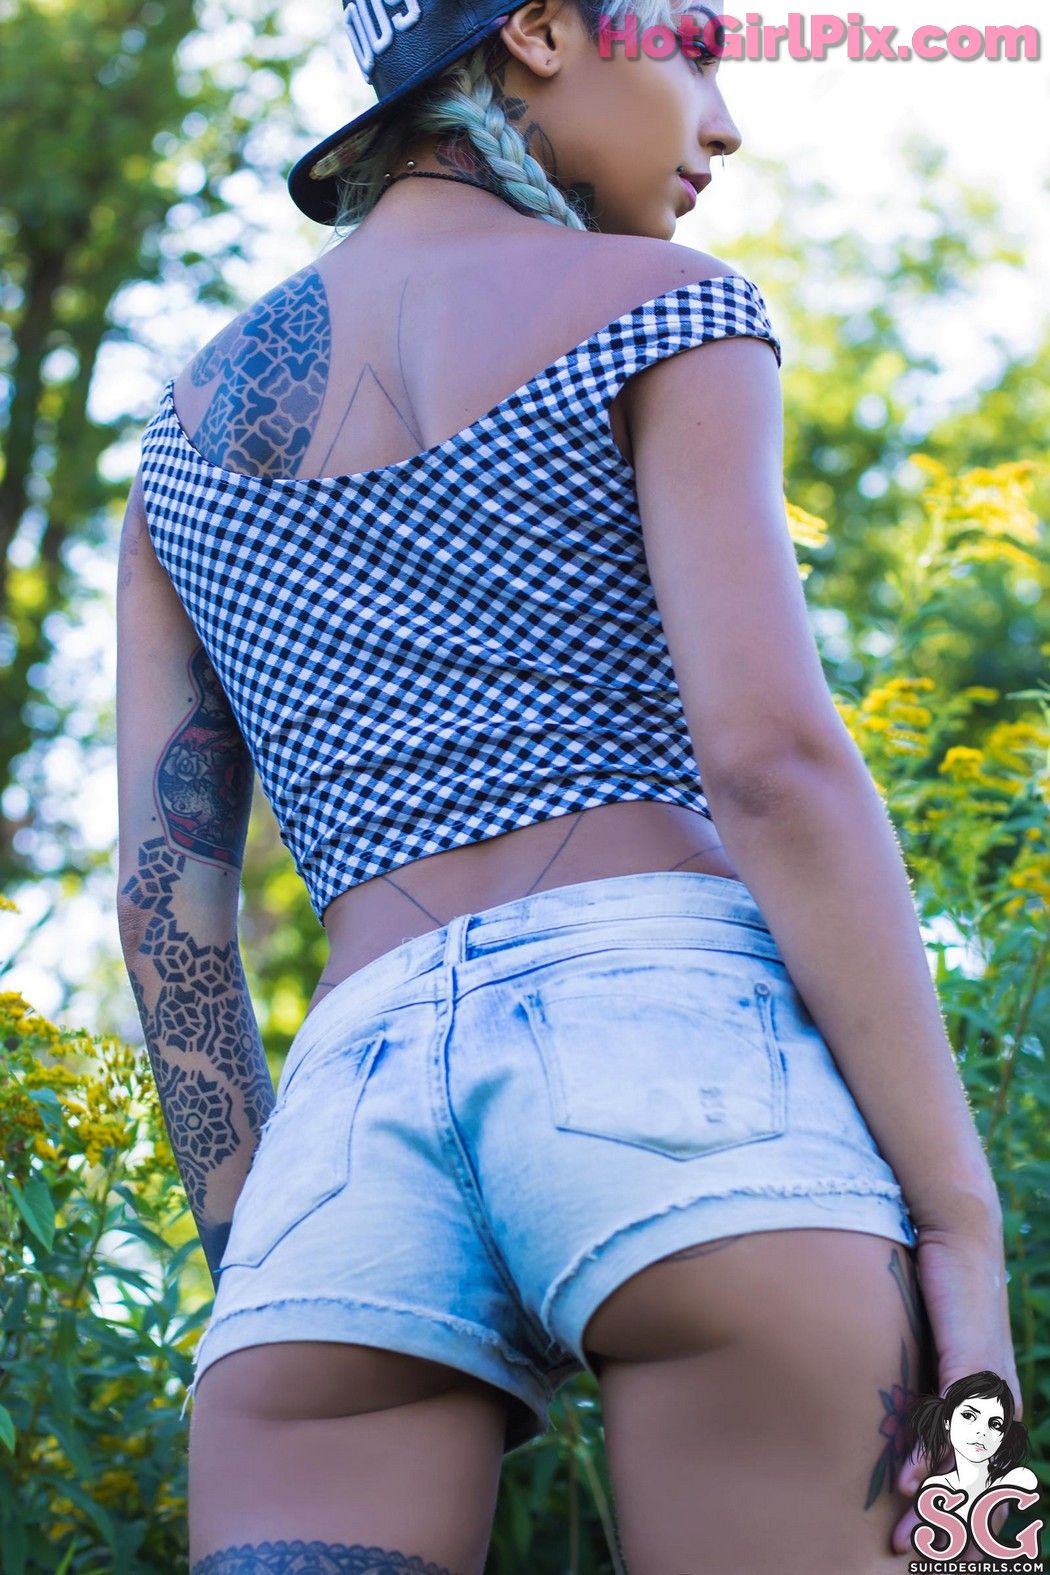 [Suicide Girls] Fishball - Lady Flower